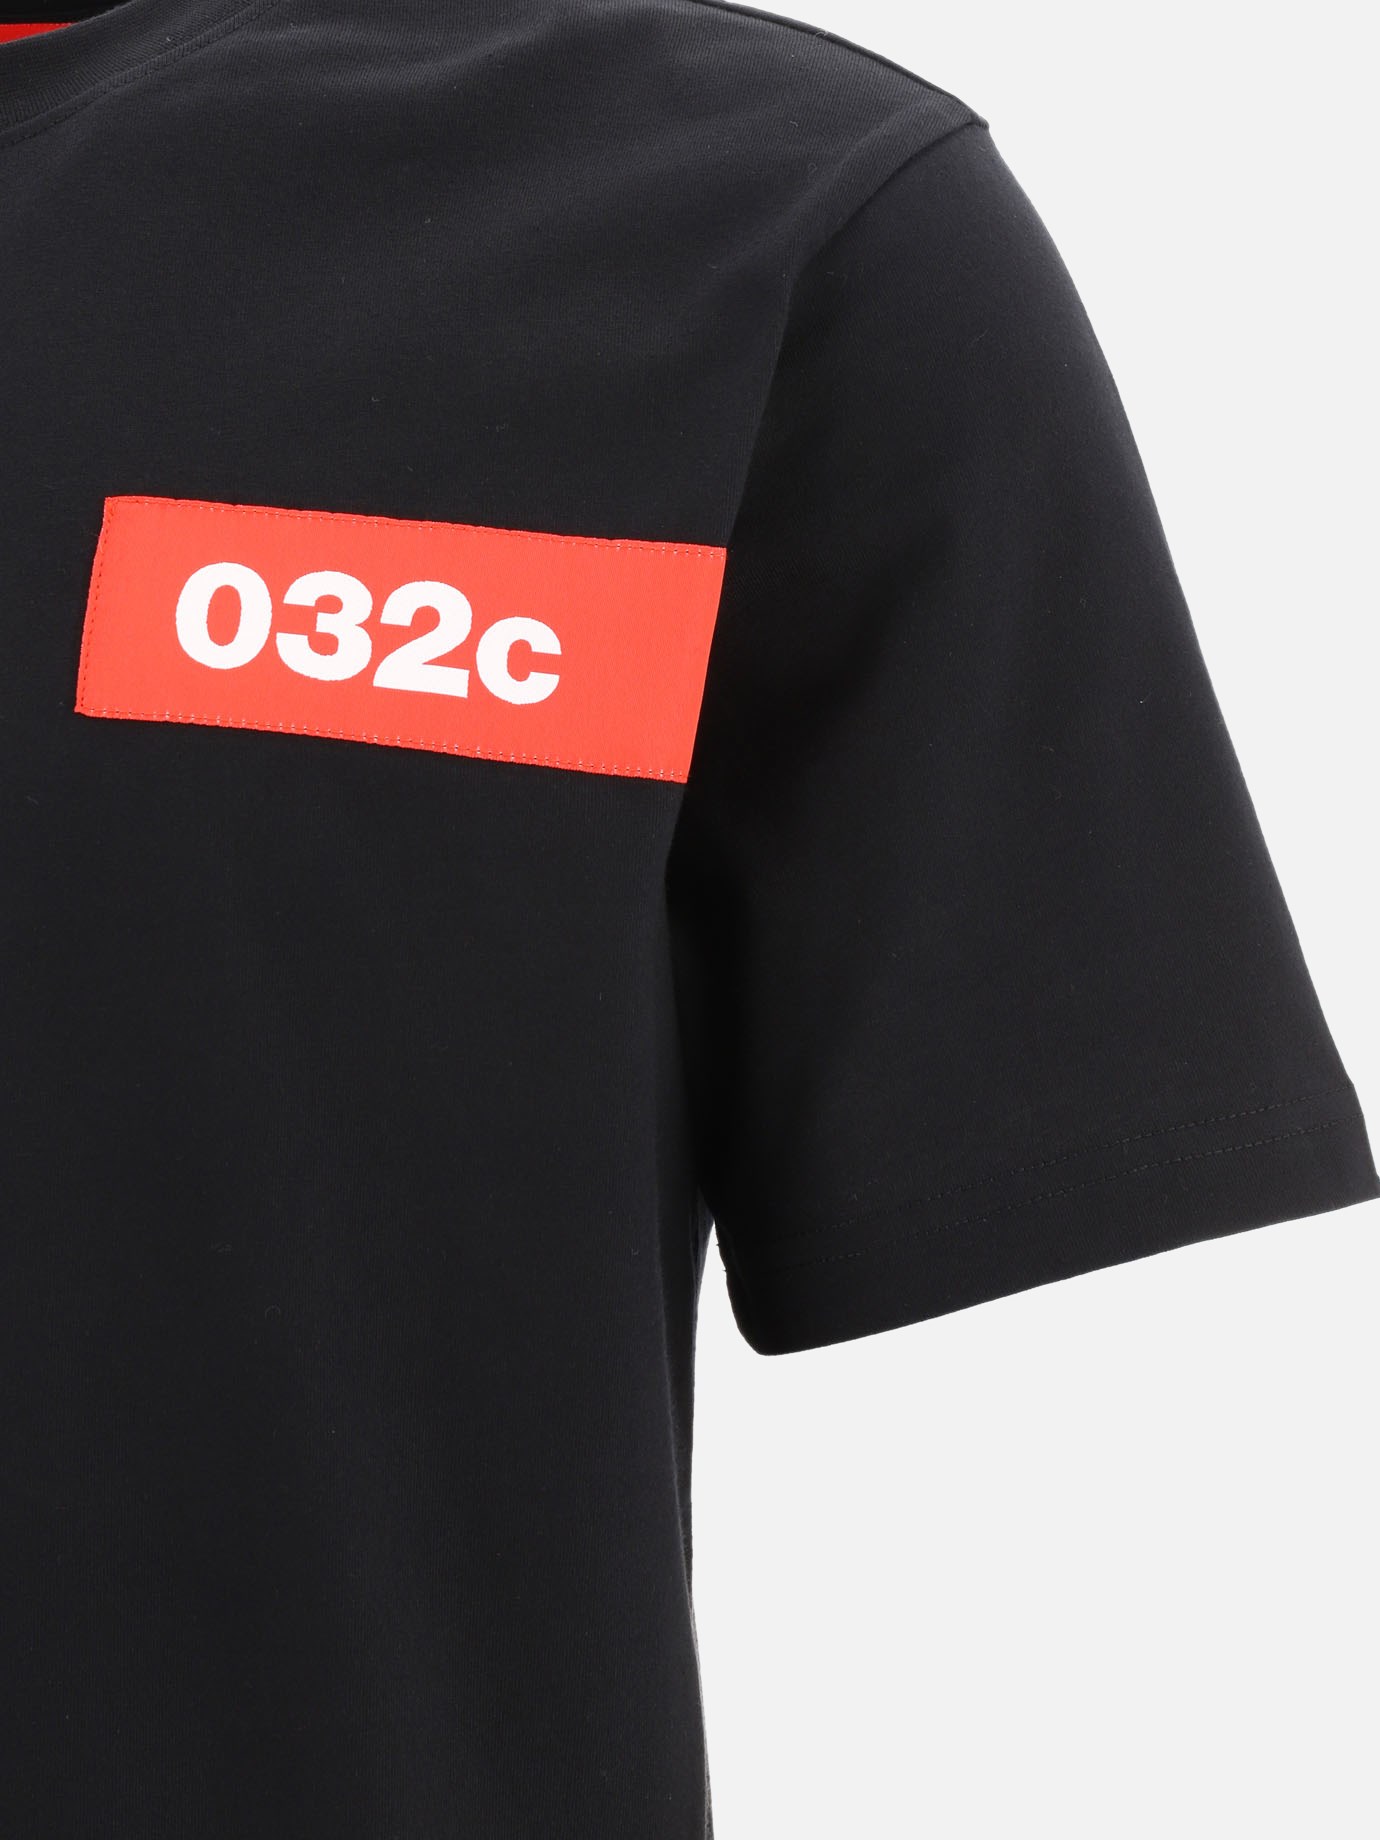 T-shirt  032C Taped  by 032c